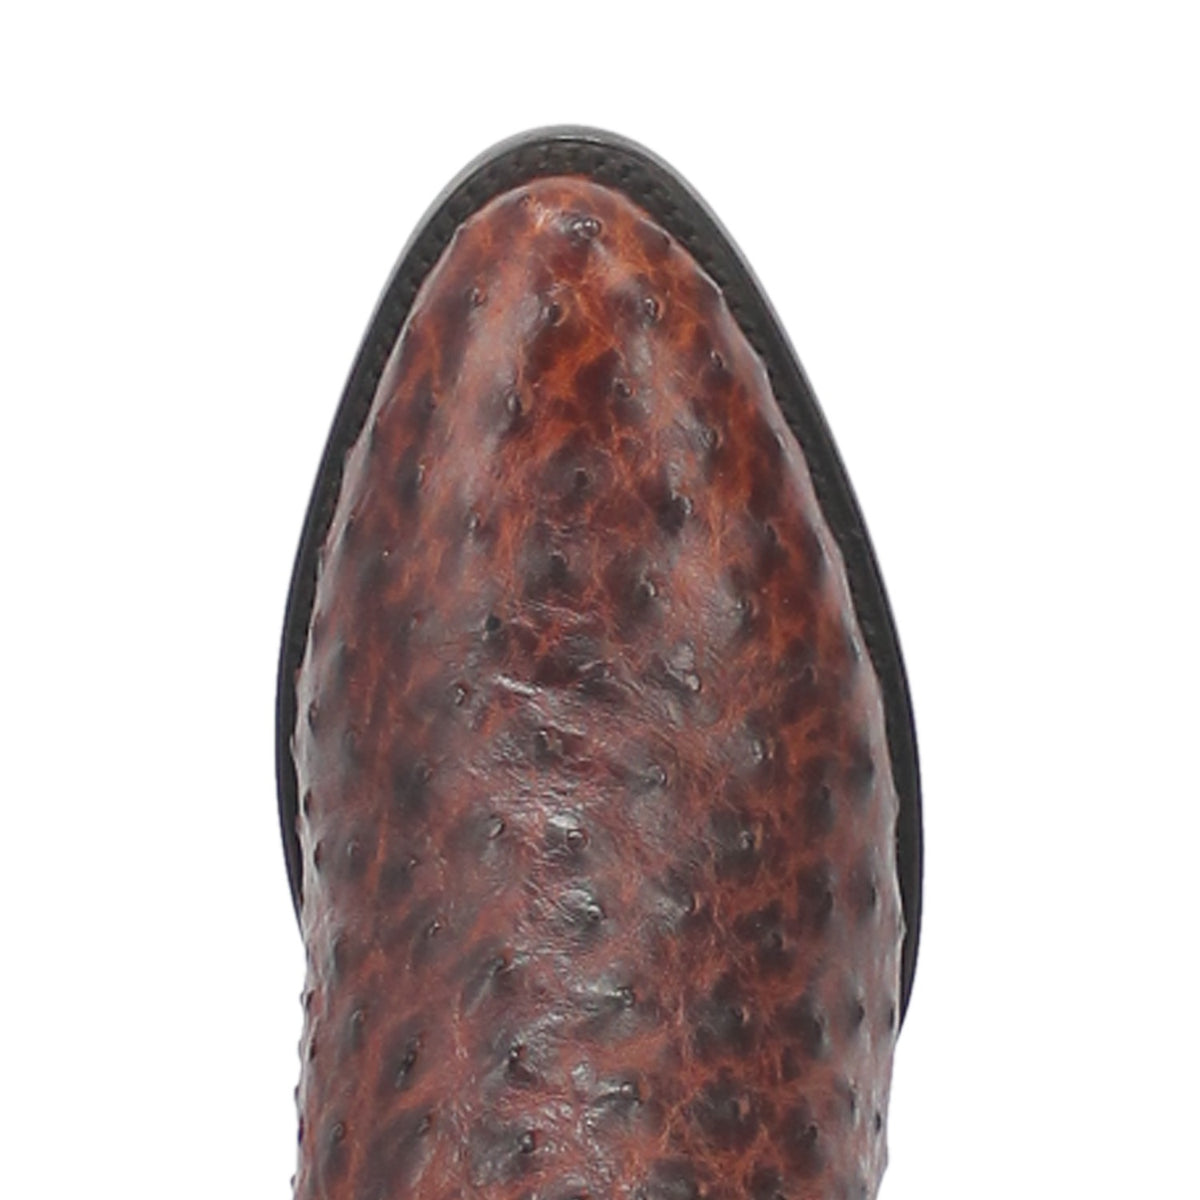 PERSHING FULL QUILL OSTRICH BOOT Cover